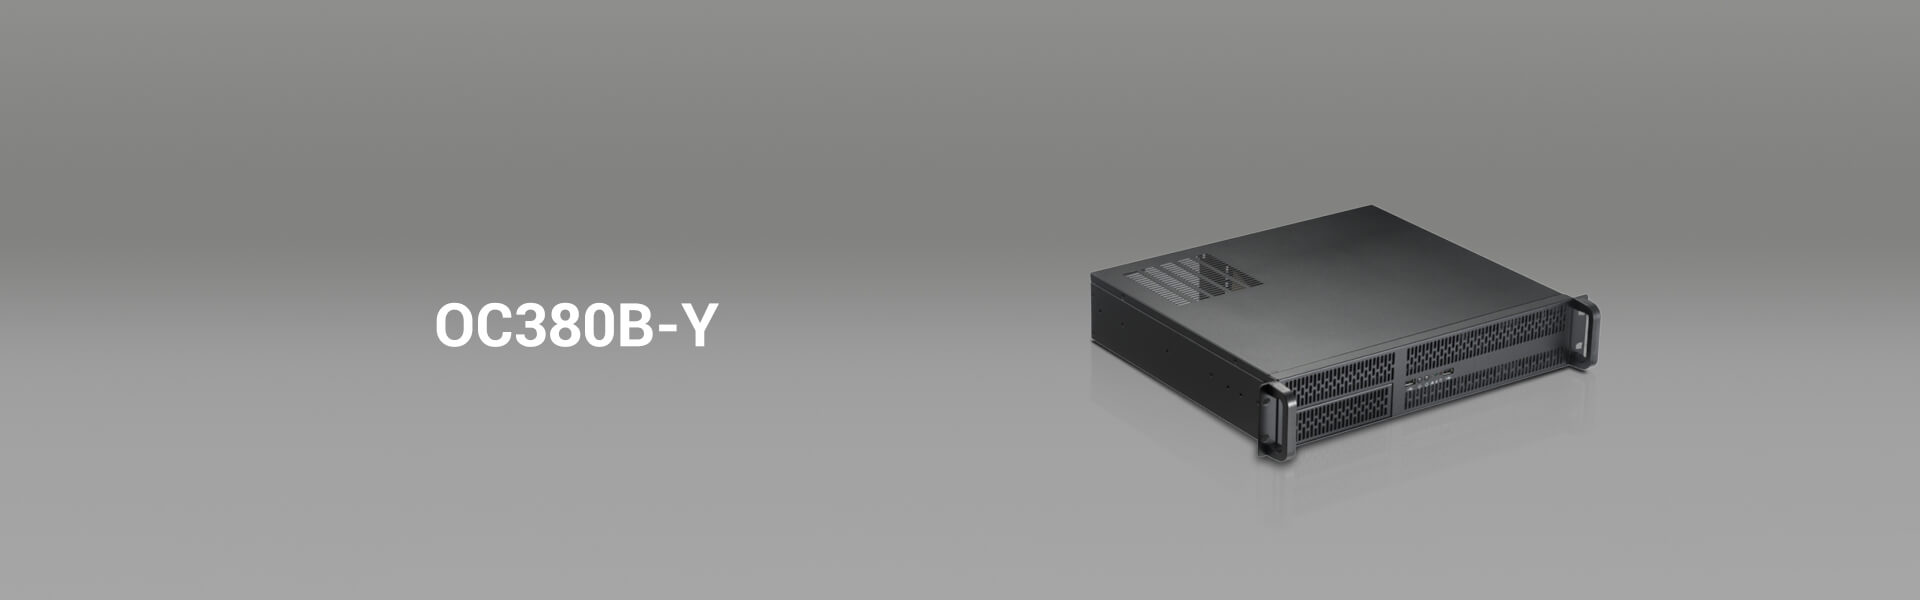 rackmount chassis-OC380B-Y-onechassis -banner